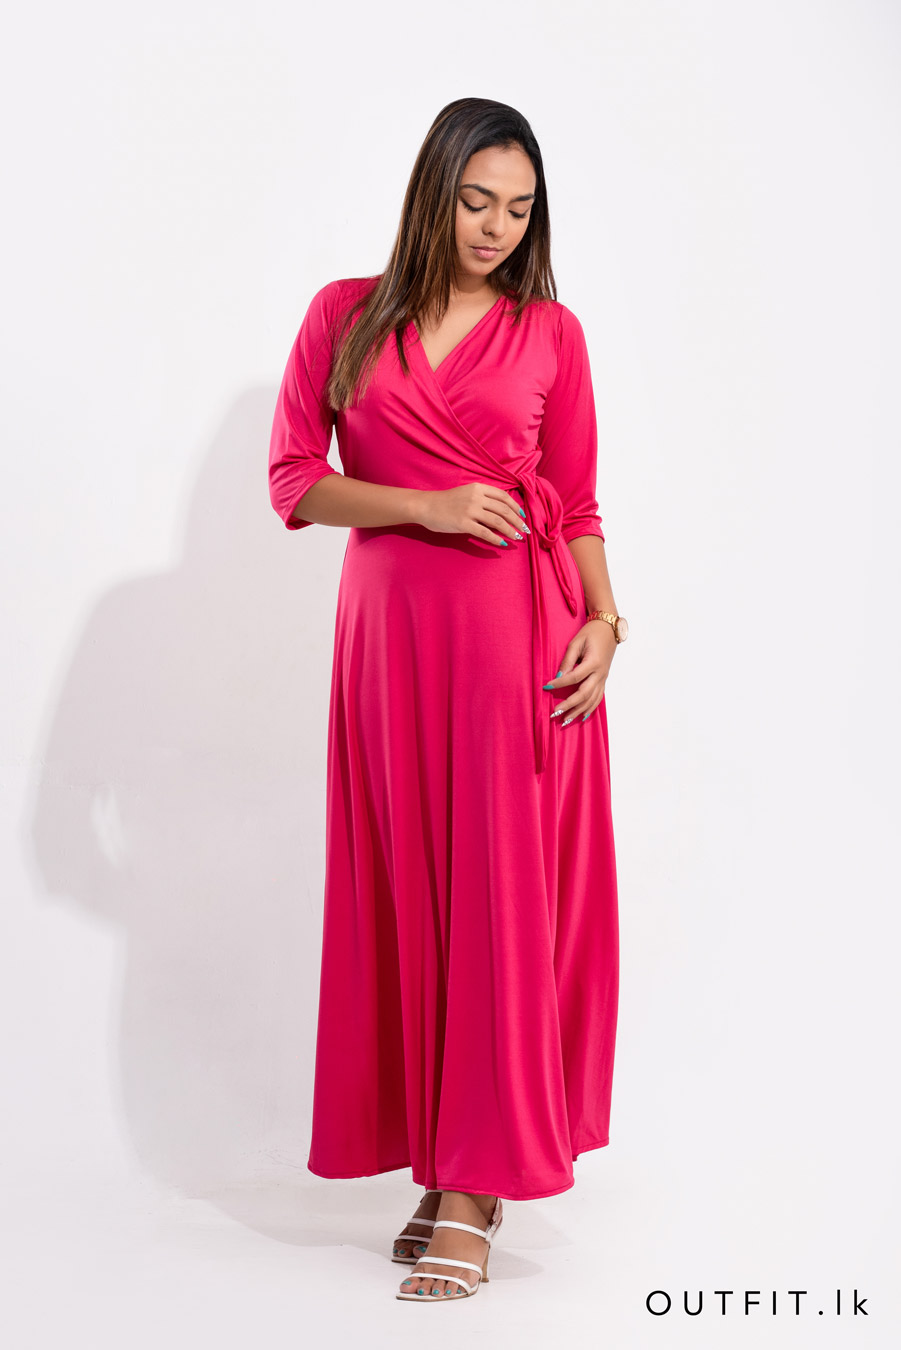 Front Cross Over Maxi Dress - OUTFIT.lk